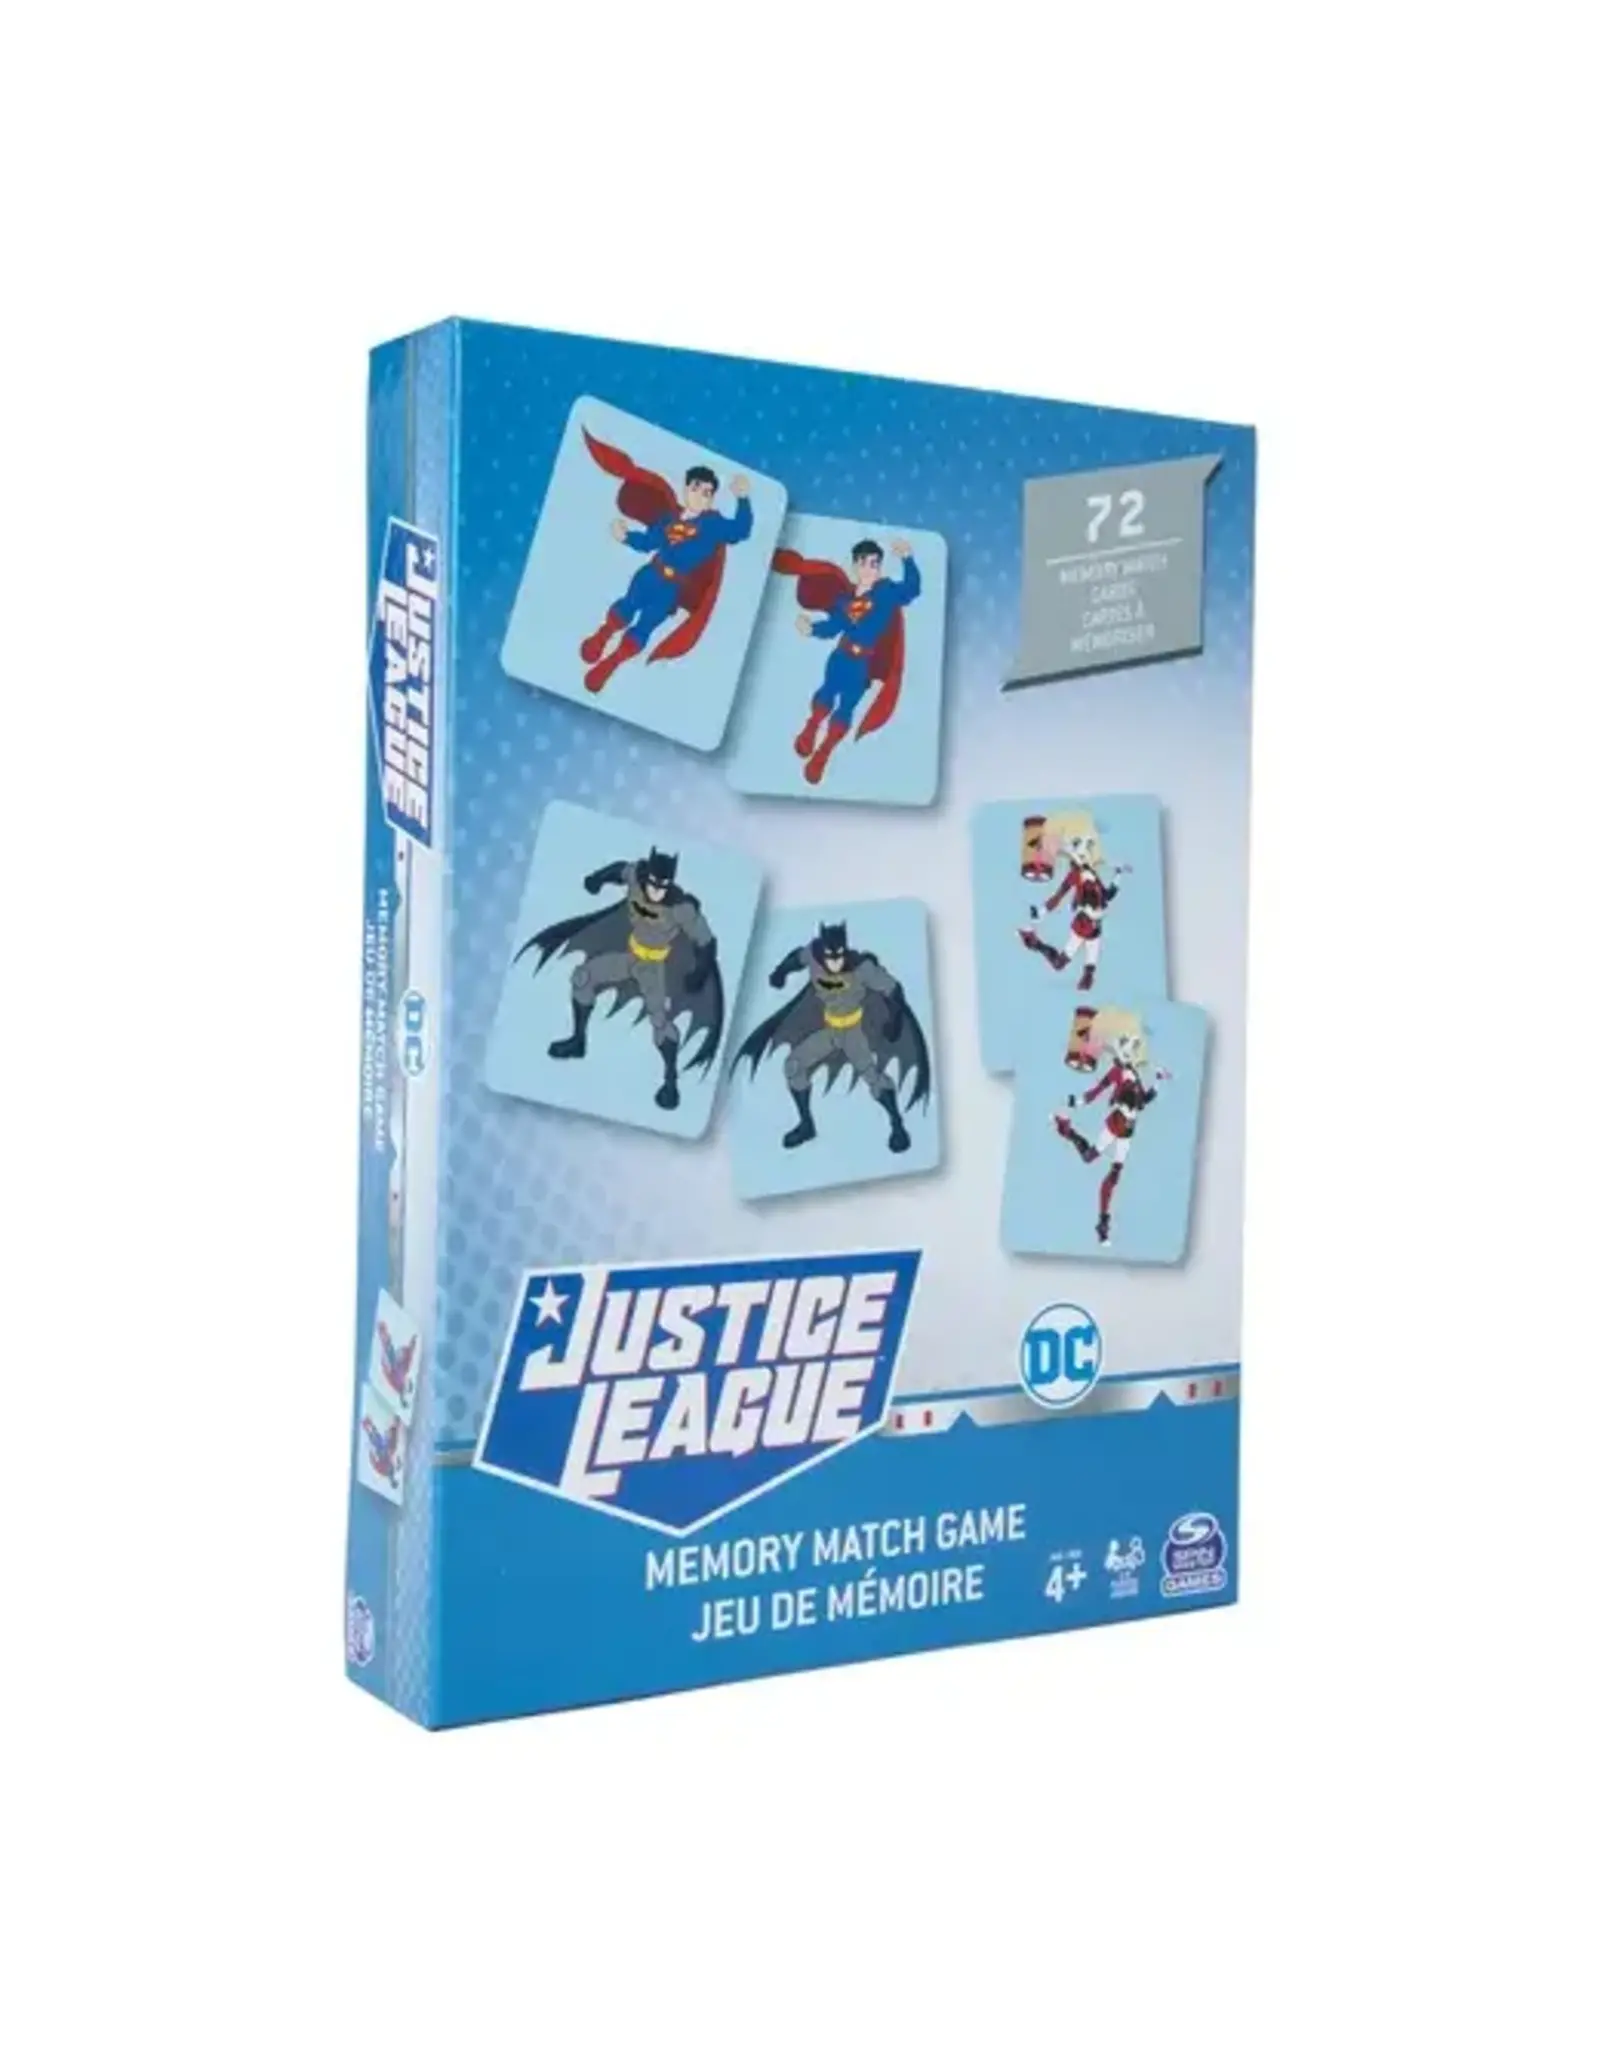 Justice League Memory Match Game